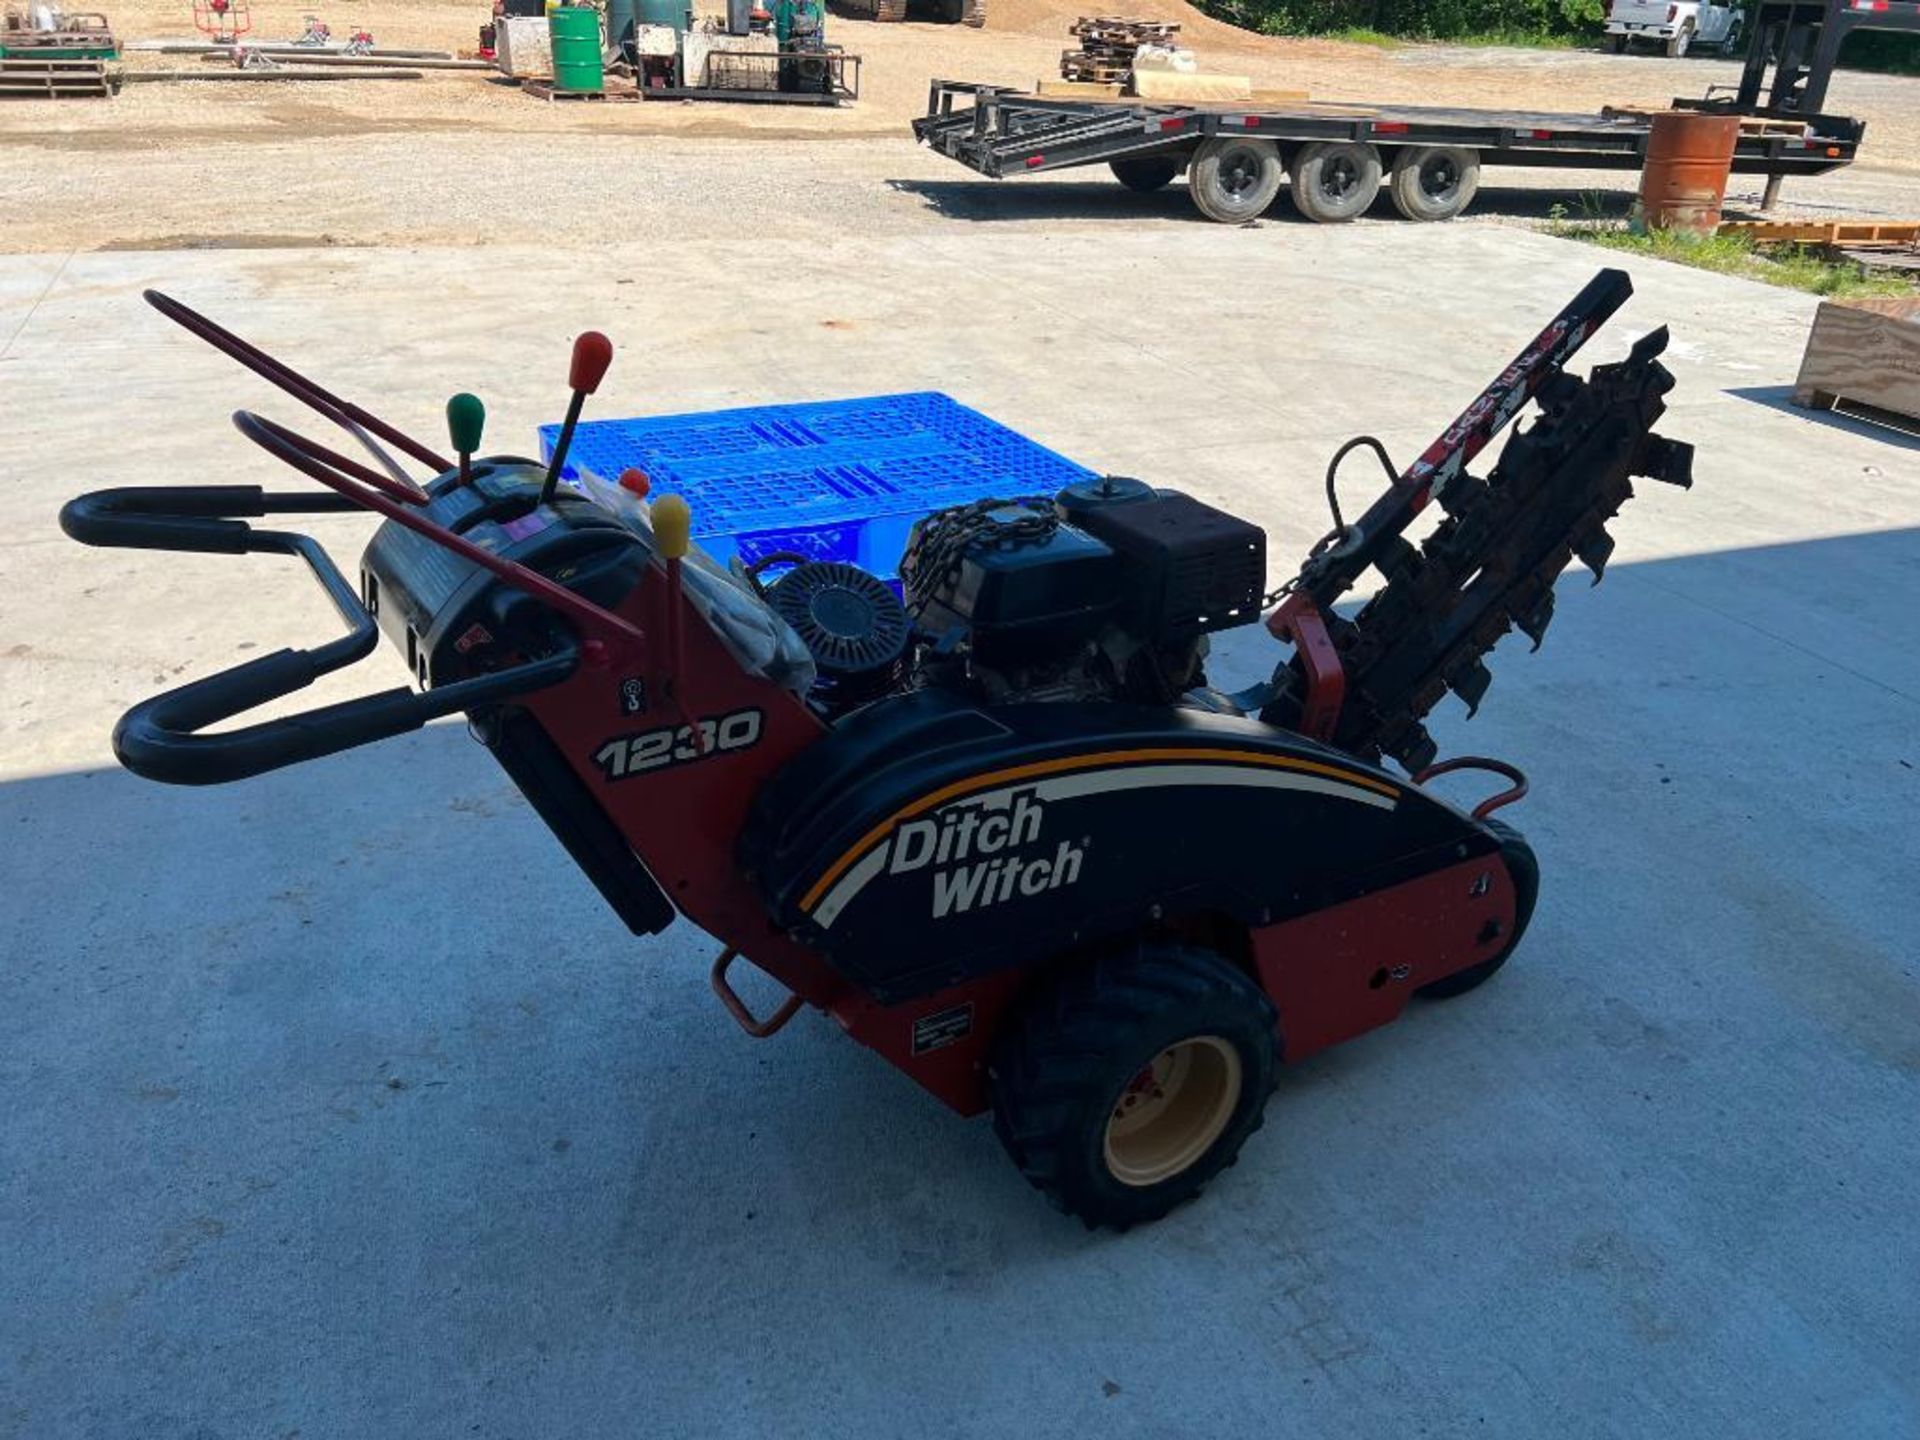 2006 Ditch Witch 1230 Walk Behind Trencher With New Teeth, Honda GX390 Engine, Product #CMW1230HK600